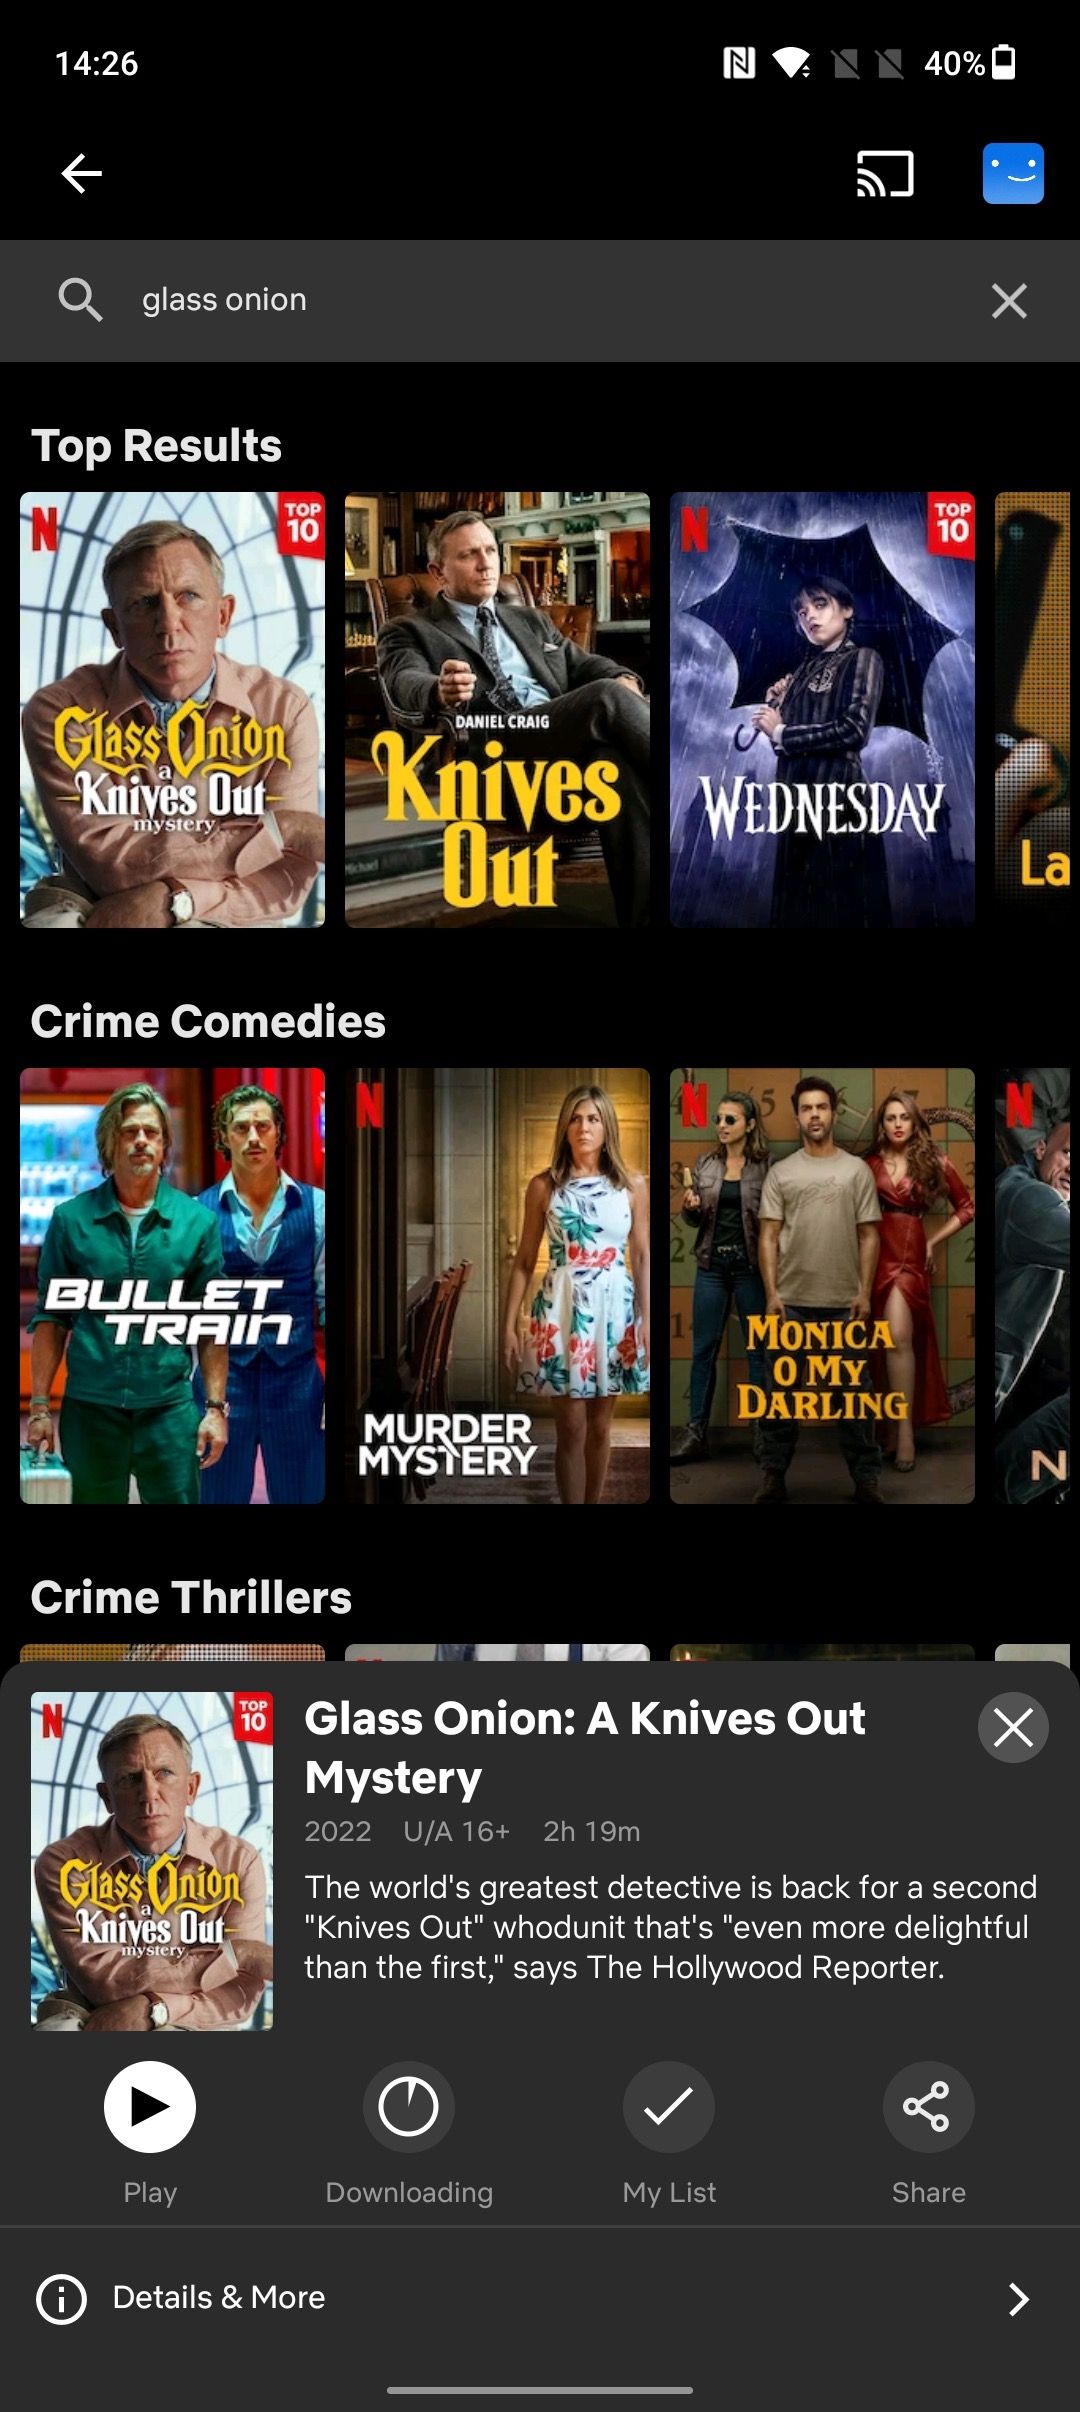 Download movies from Netflix on Android 5